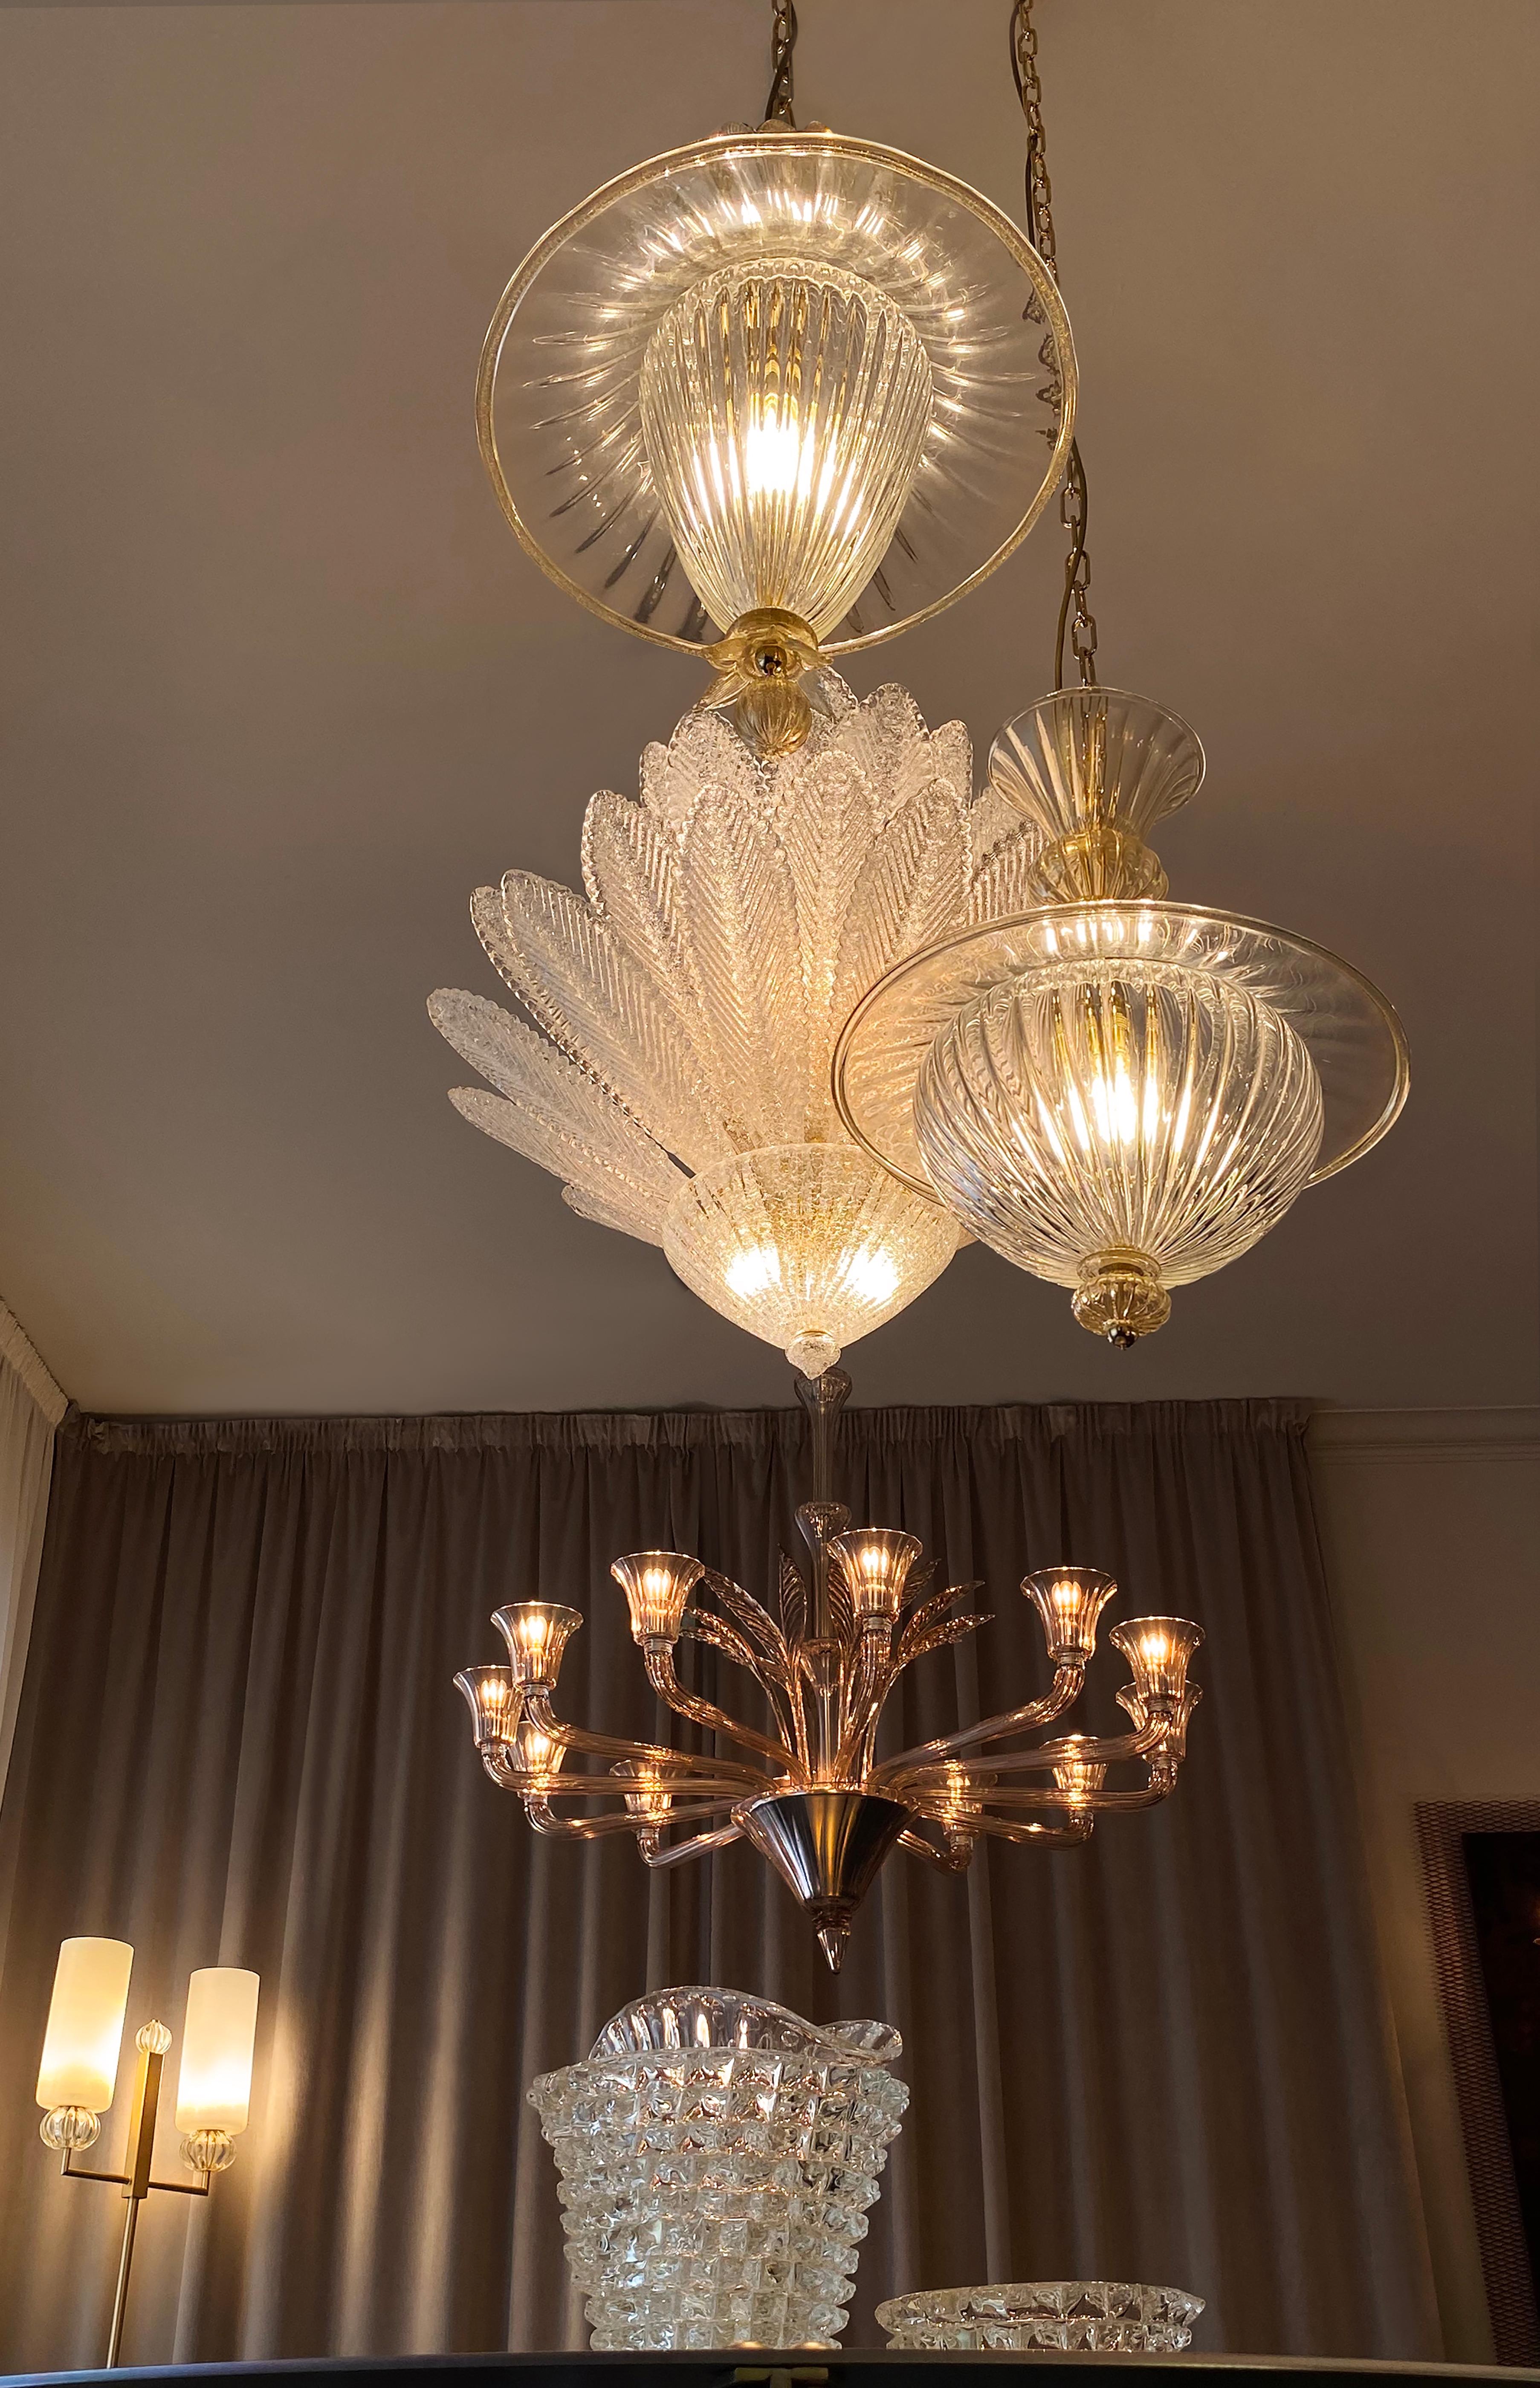 Italian Spade 6746 Suspension Lamp in Glass and Chrome Finishing, by Barovier&Toso